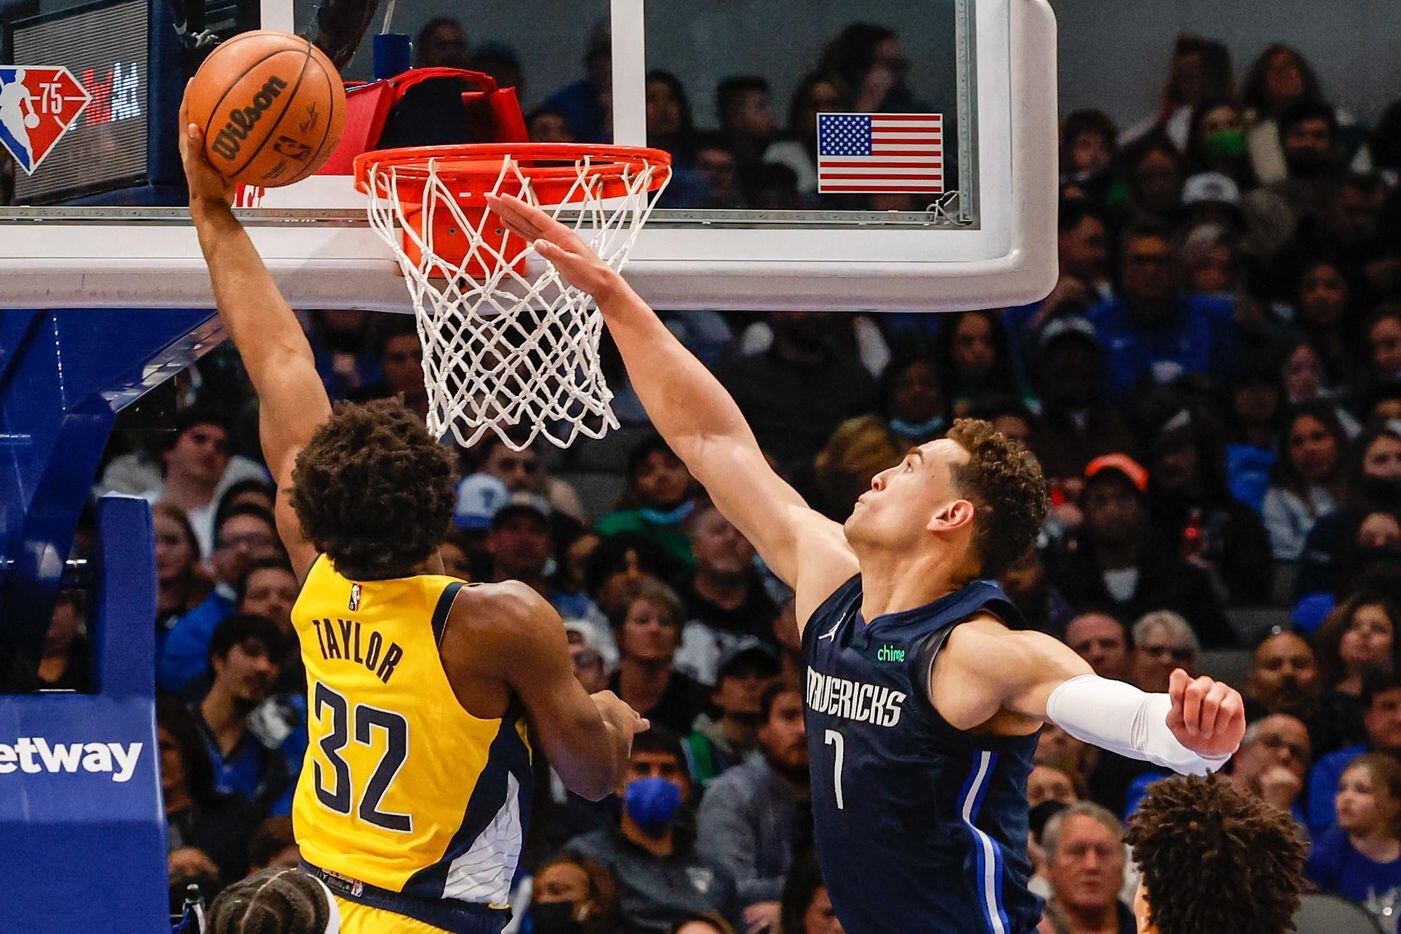 Indiana Pacers guard Terry Taylor (32) goes to the basket as Dallas Mavericks center Dwight Powell (7) tries to block him during the second half at the American Airlines Center in Dallas on Saturday, January 29, 2022.